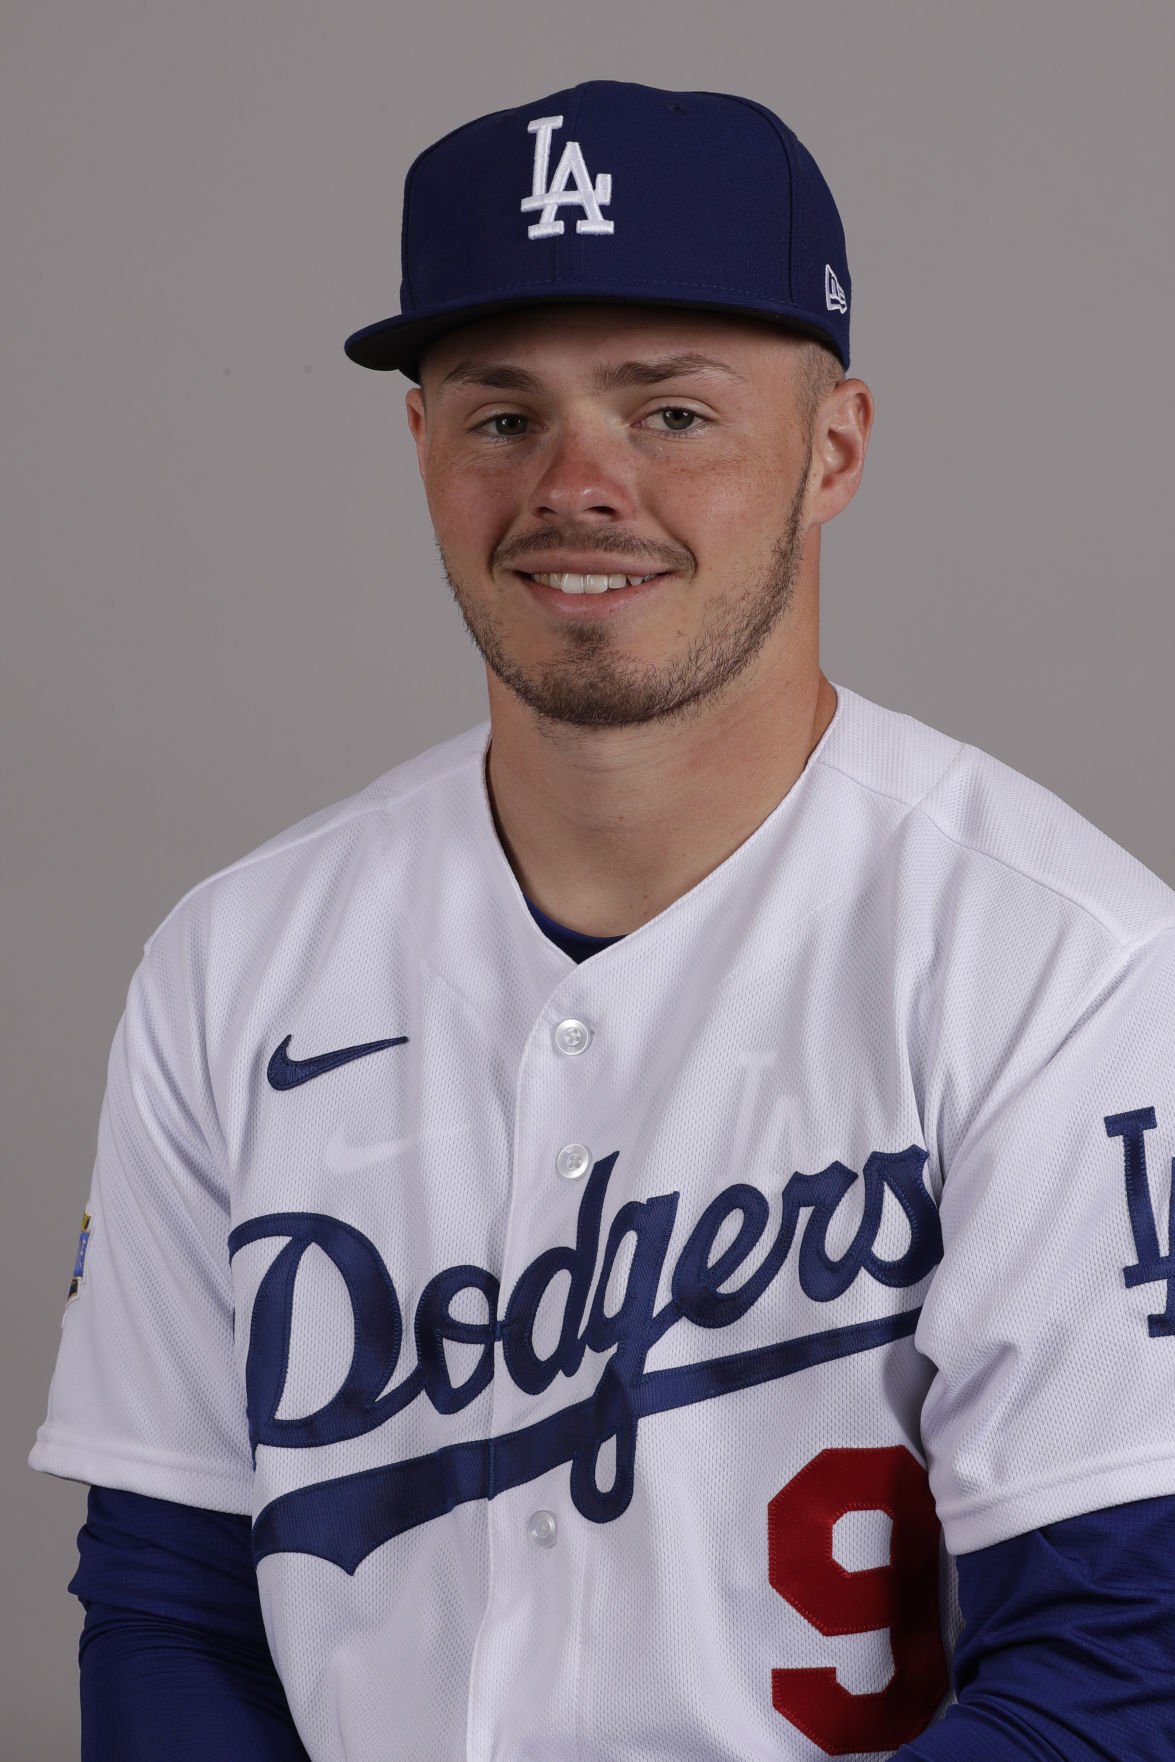 Baseball: Lux not on Dodgers' NLCS roster